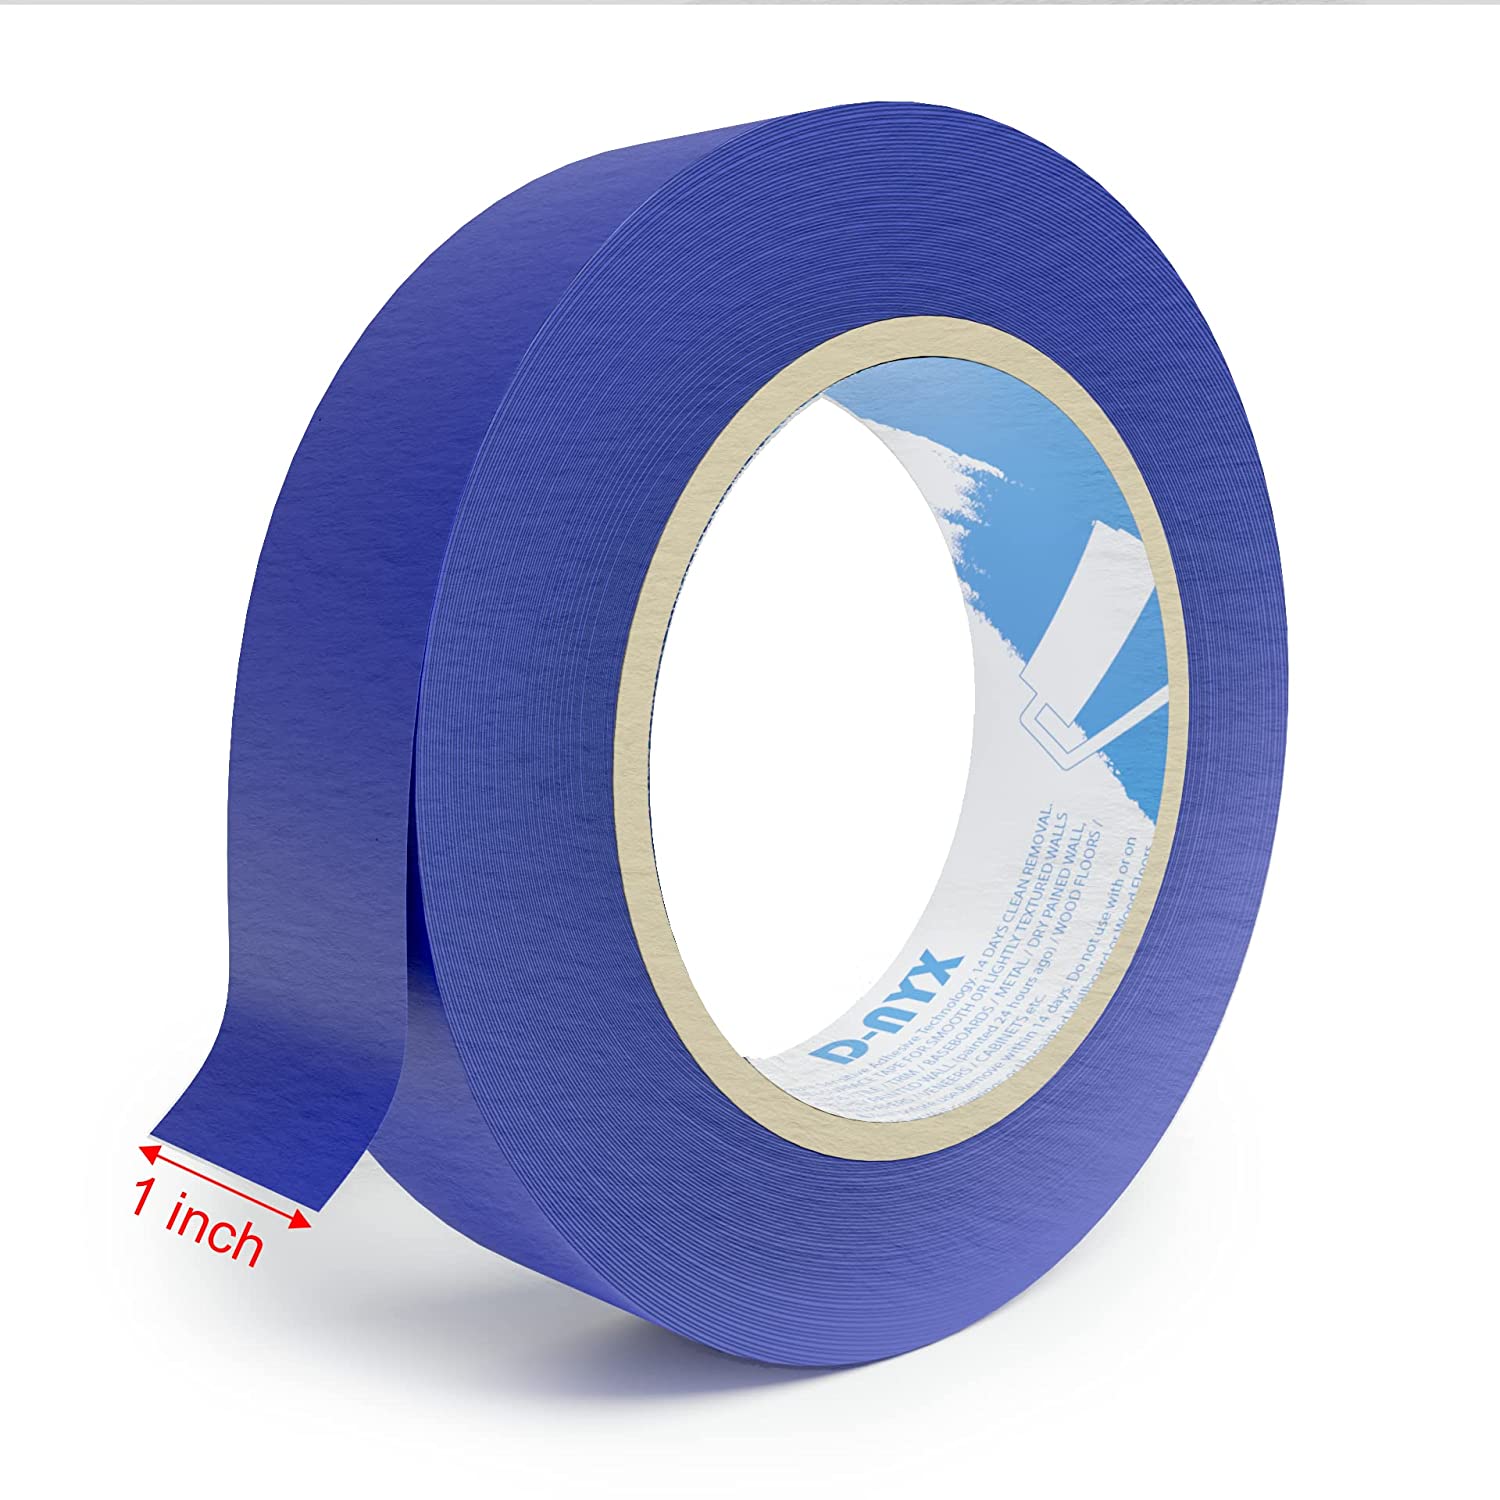 Painters Tape Adhesive Painting Tape 1.57 Inches x 21.87 Yards White 6 Pcs  - 4cm x 20m